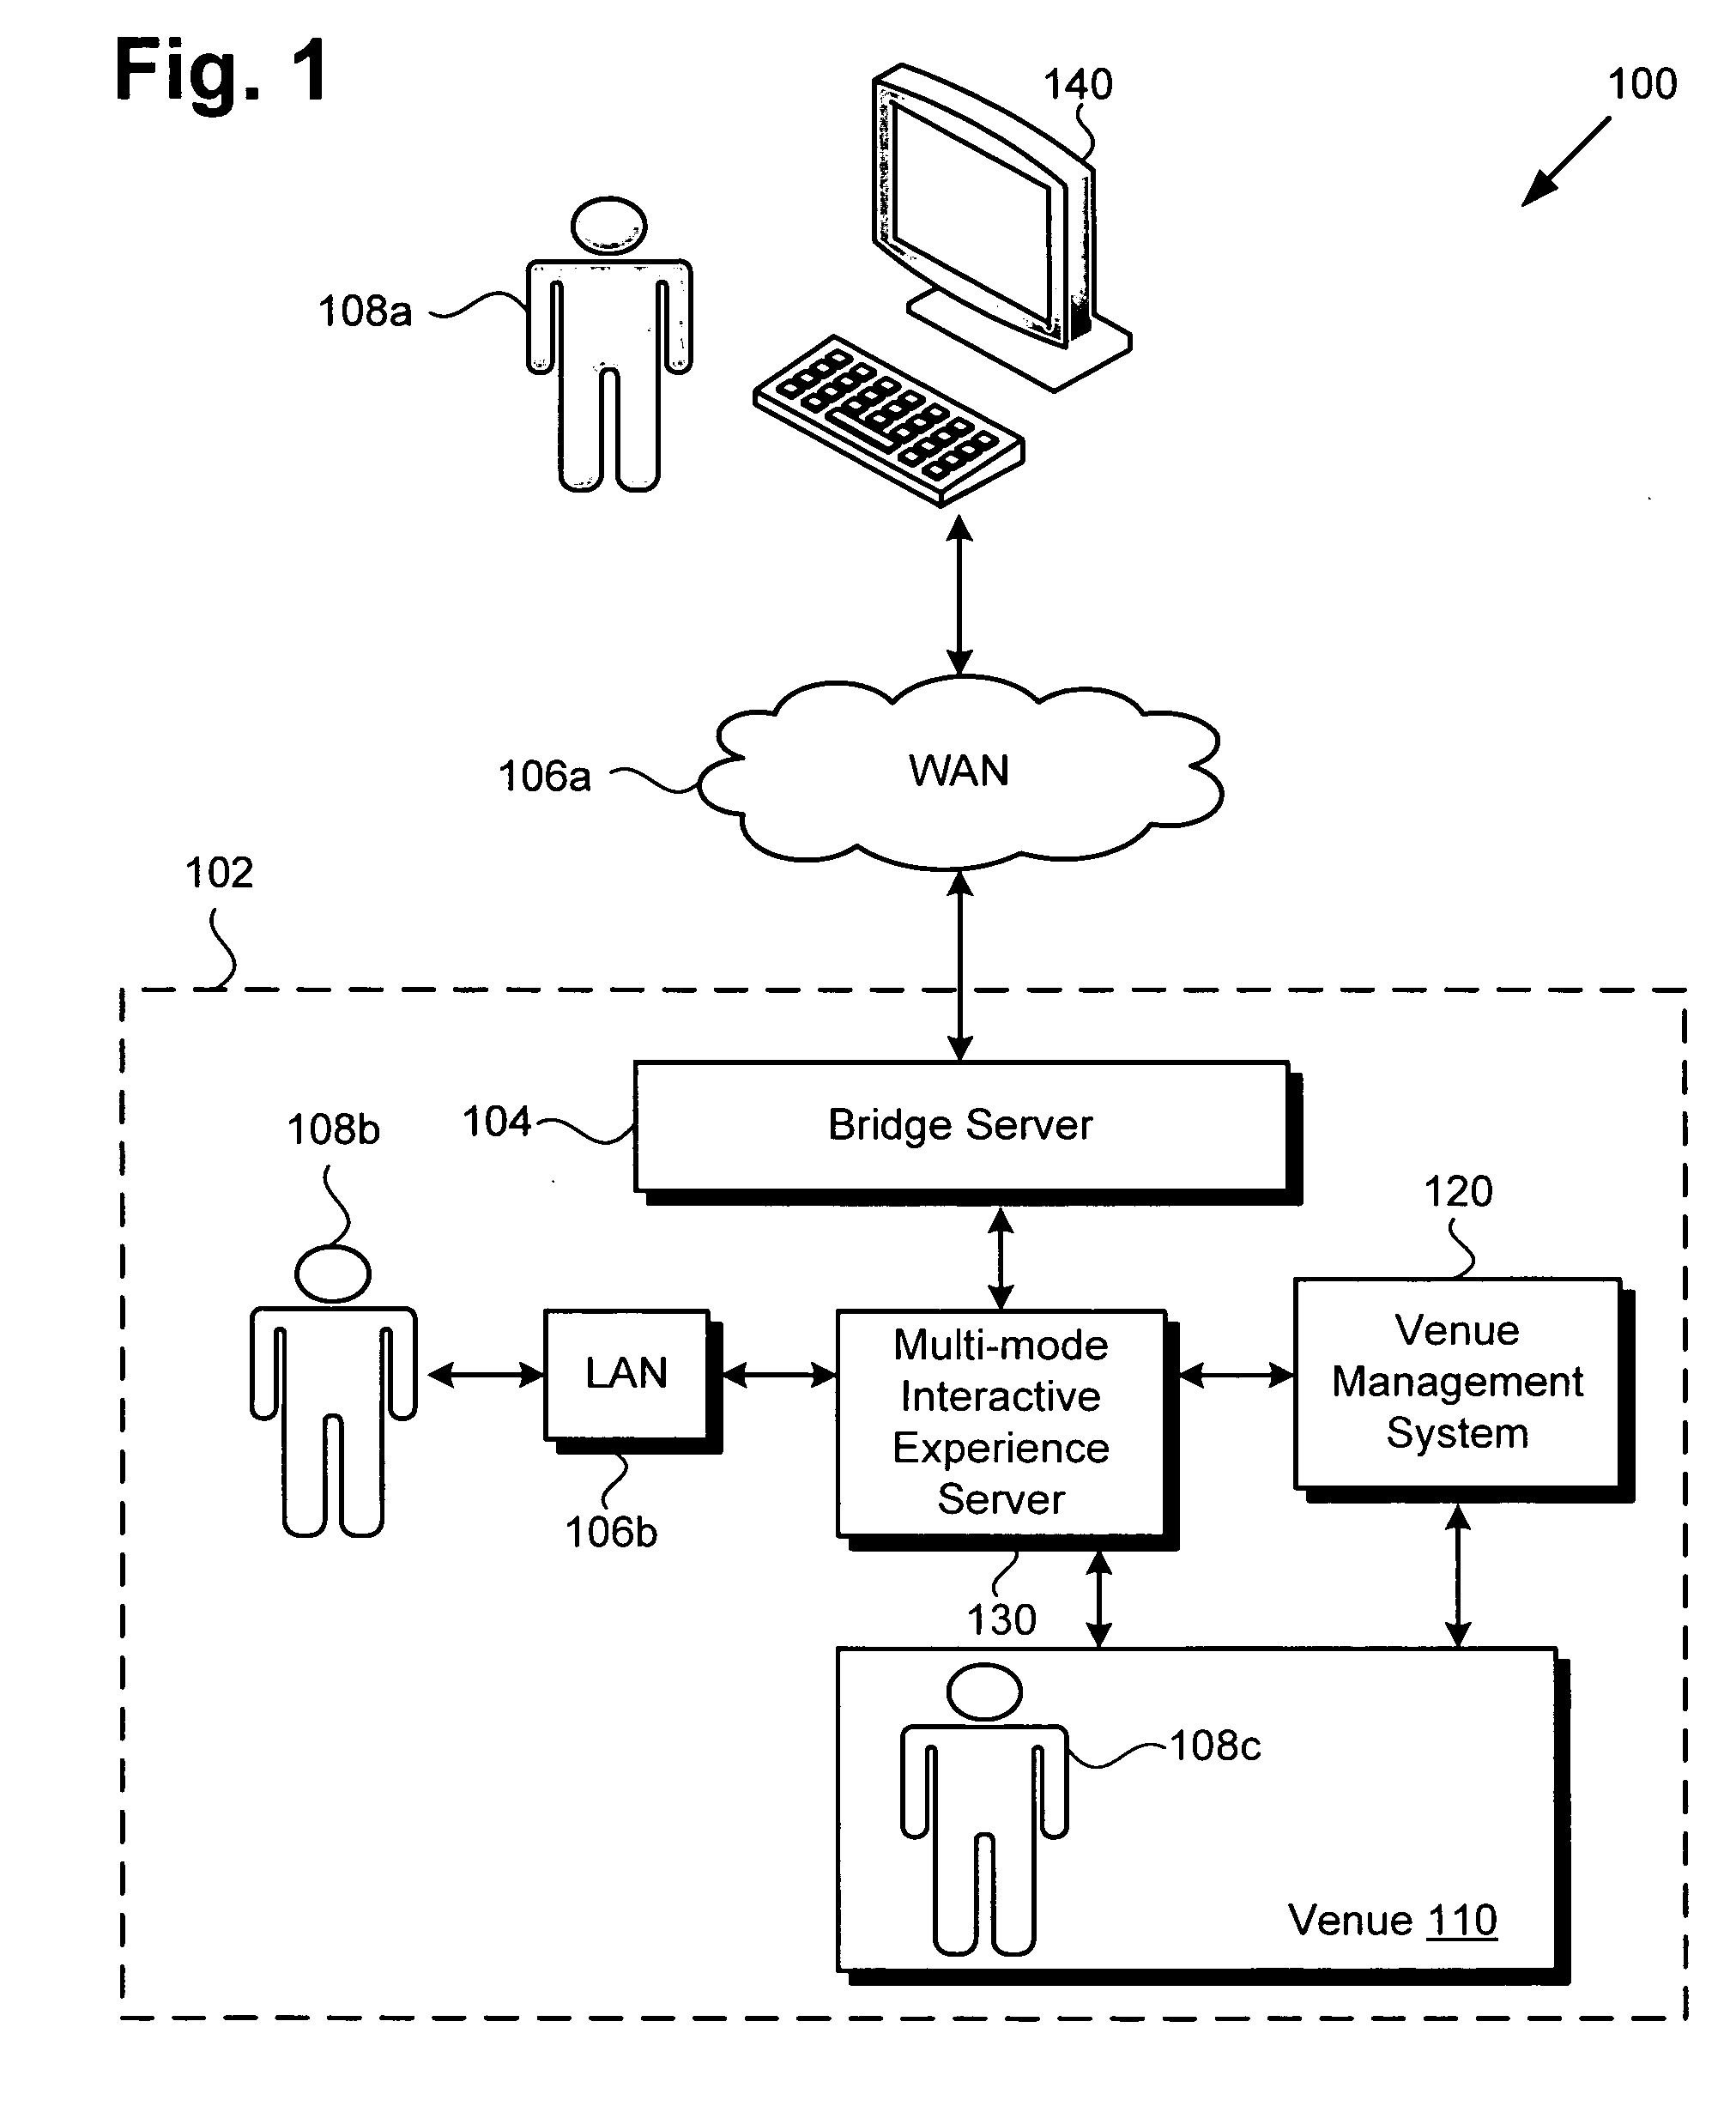 Method and system for providing a multi-mode interactive experience